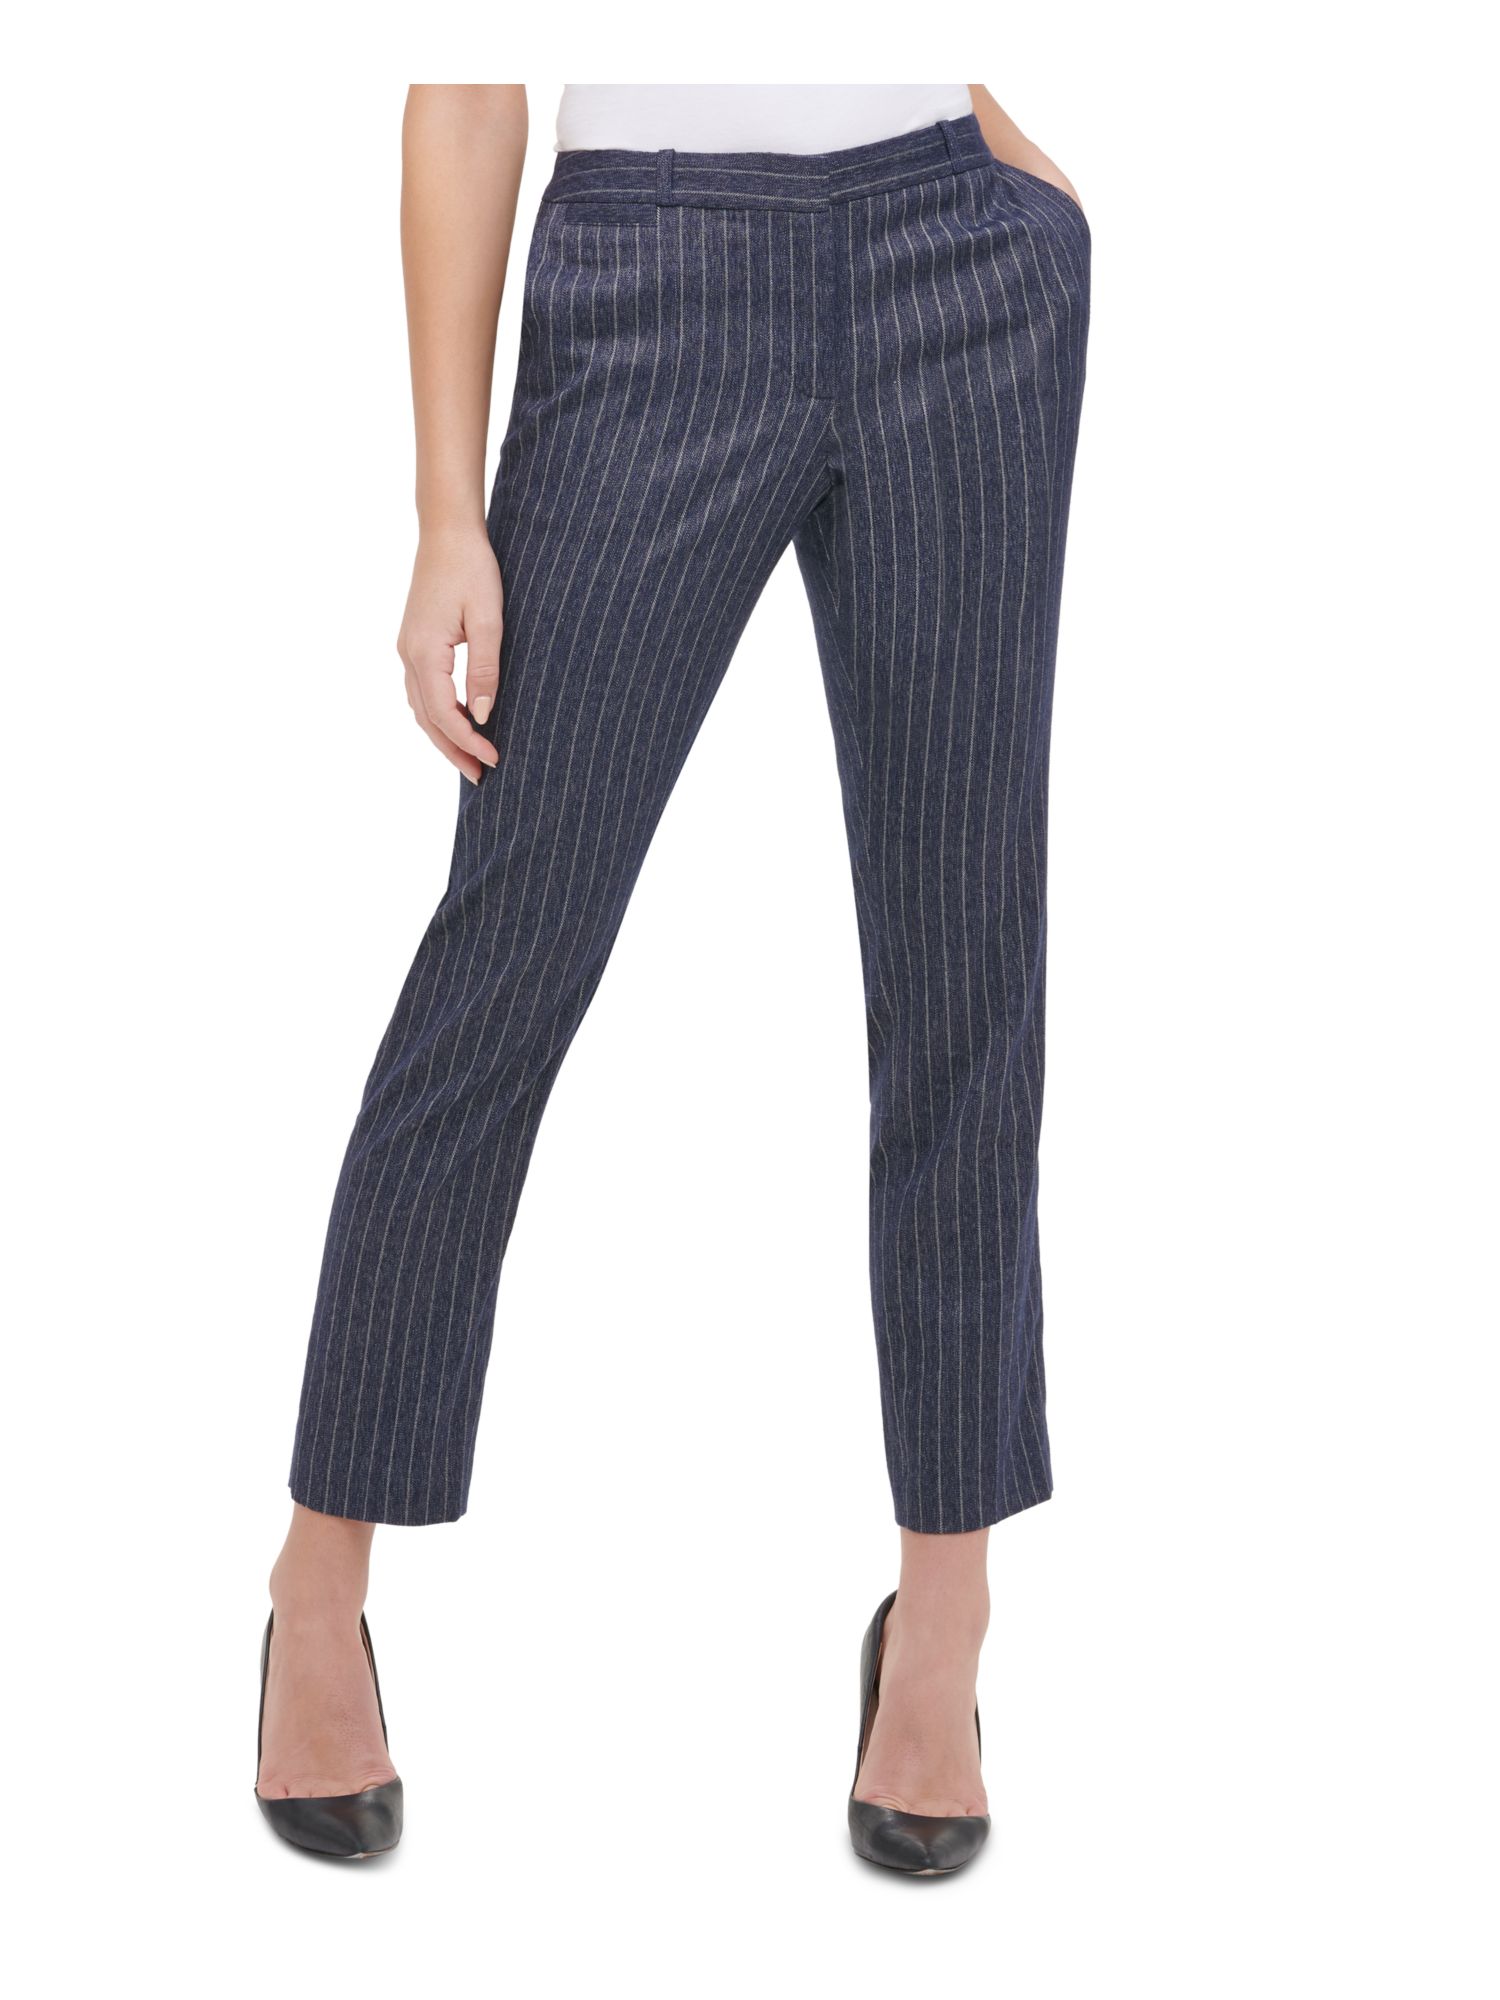 TOMMY HILFIGER Womens Navy Zippered Pinstripe Pants Size: 6 - image 1 of 4